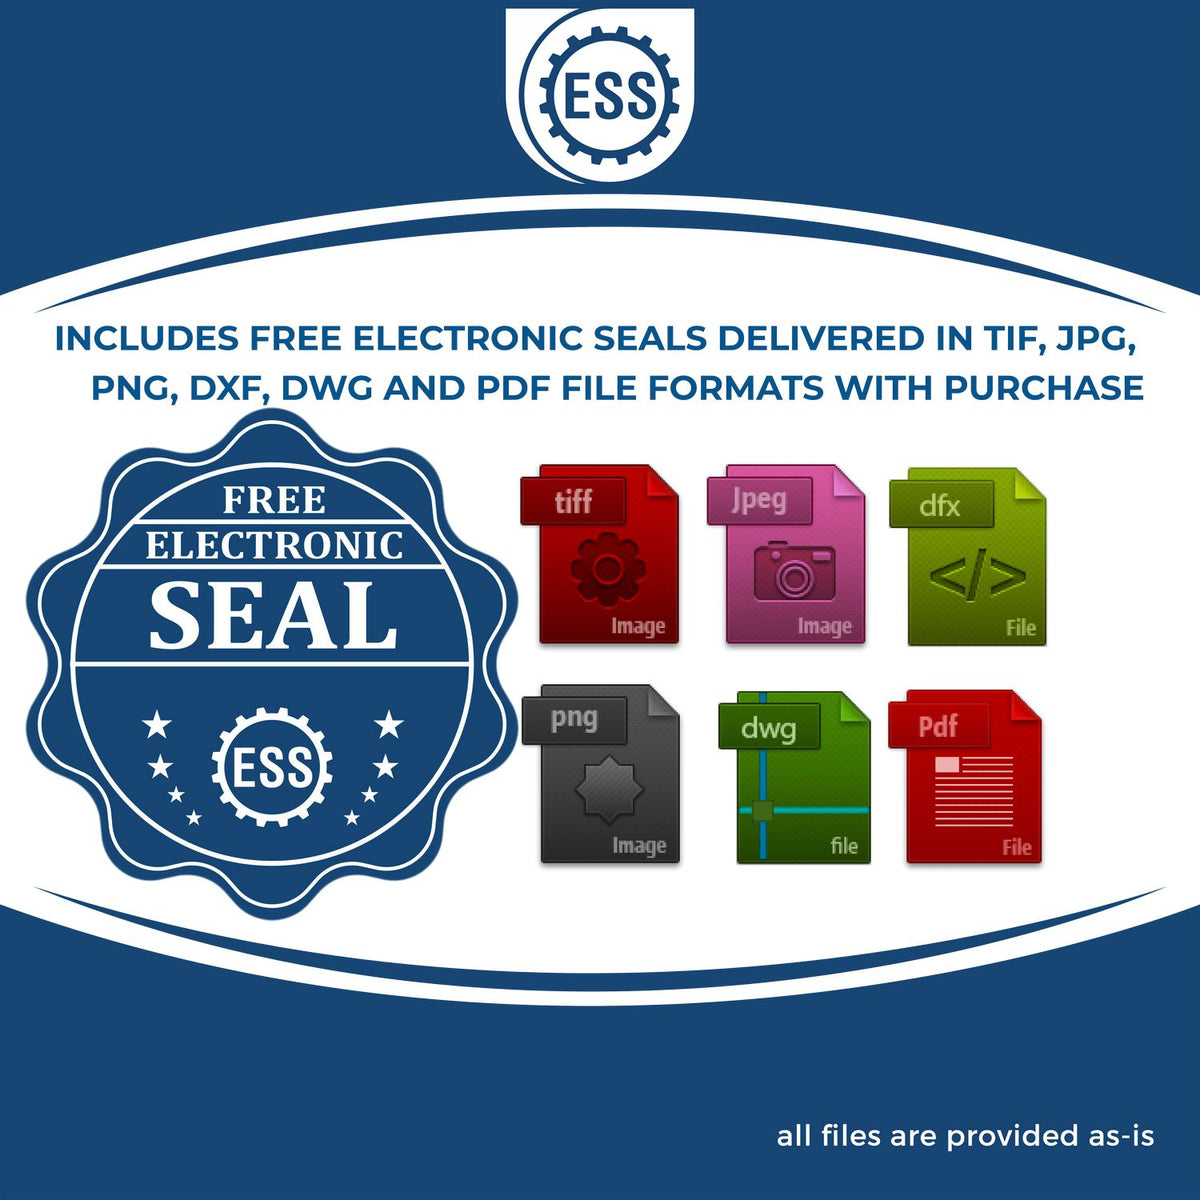 An infographic for the free electronic seal for the Gift Georgia Land Surveyor Seal illustrating the different file type icons such as DXF, DWG, TIF, JPG and PNG.